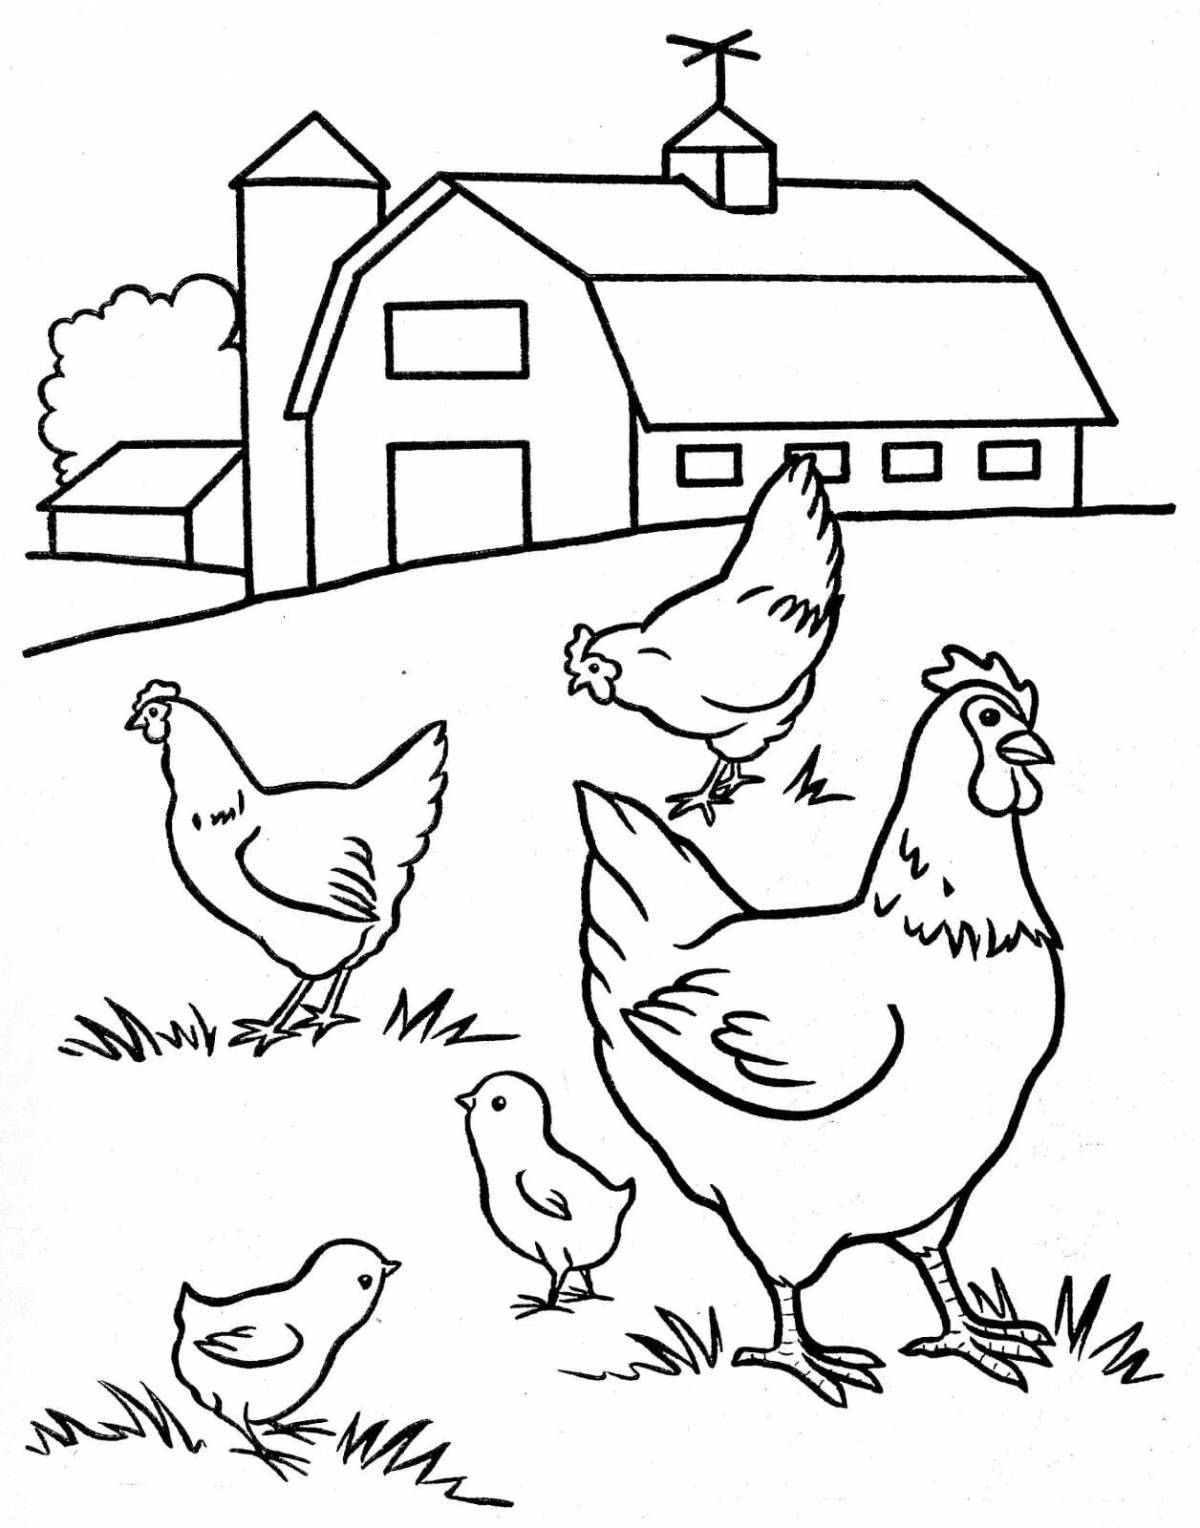 Coloring page funny bird yard